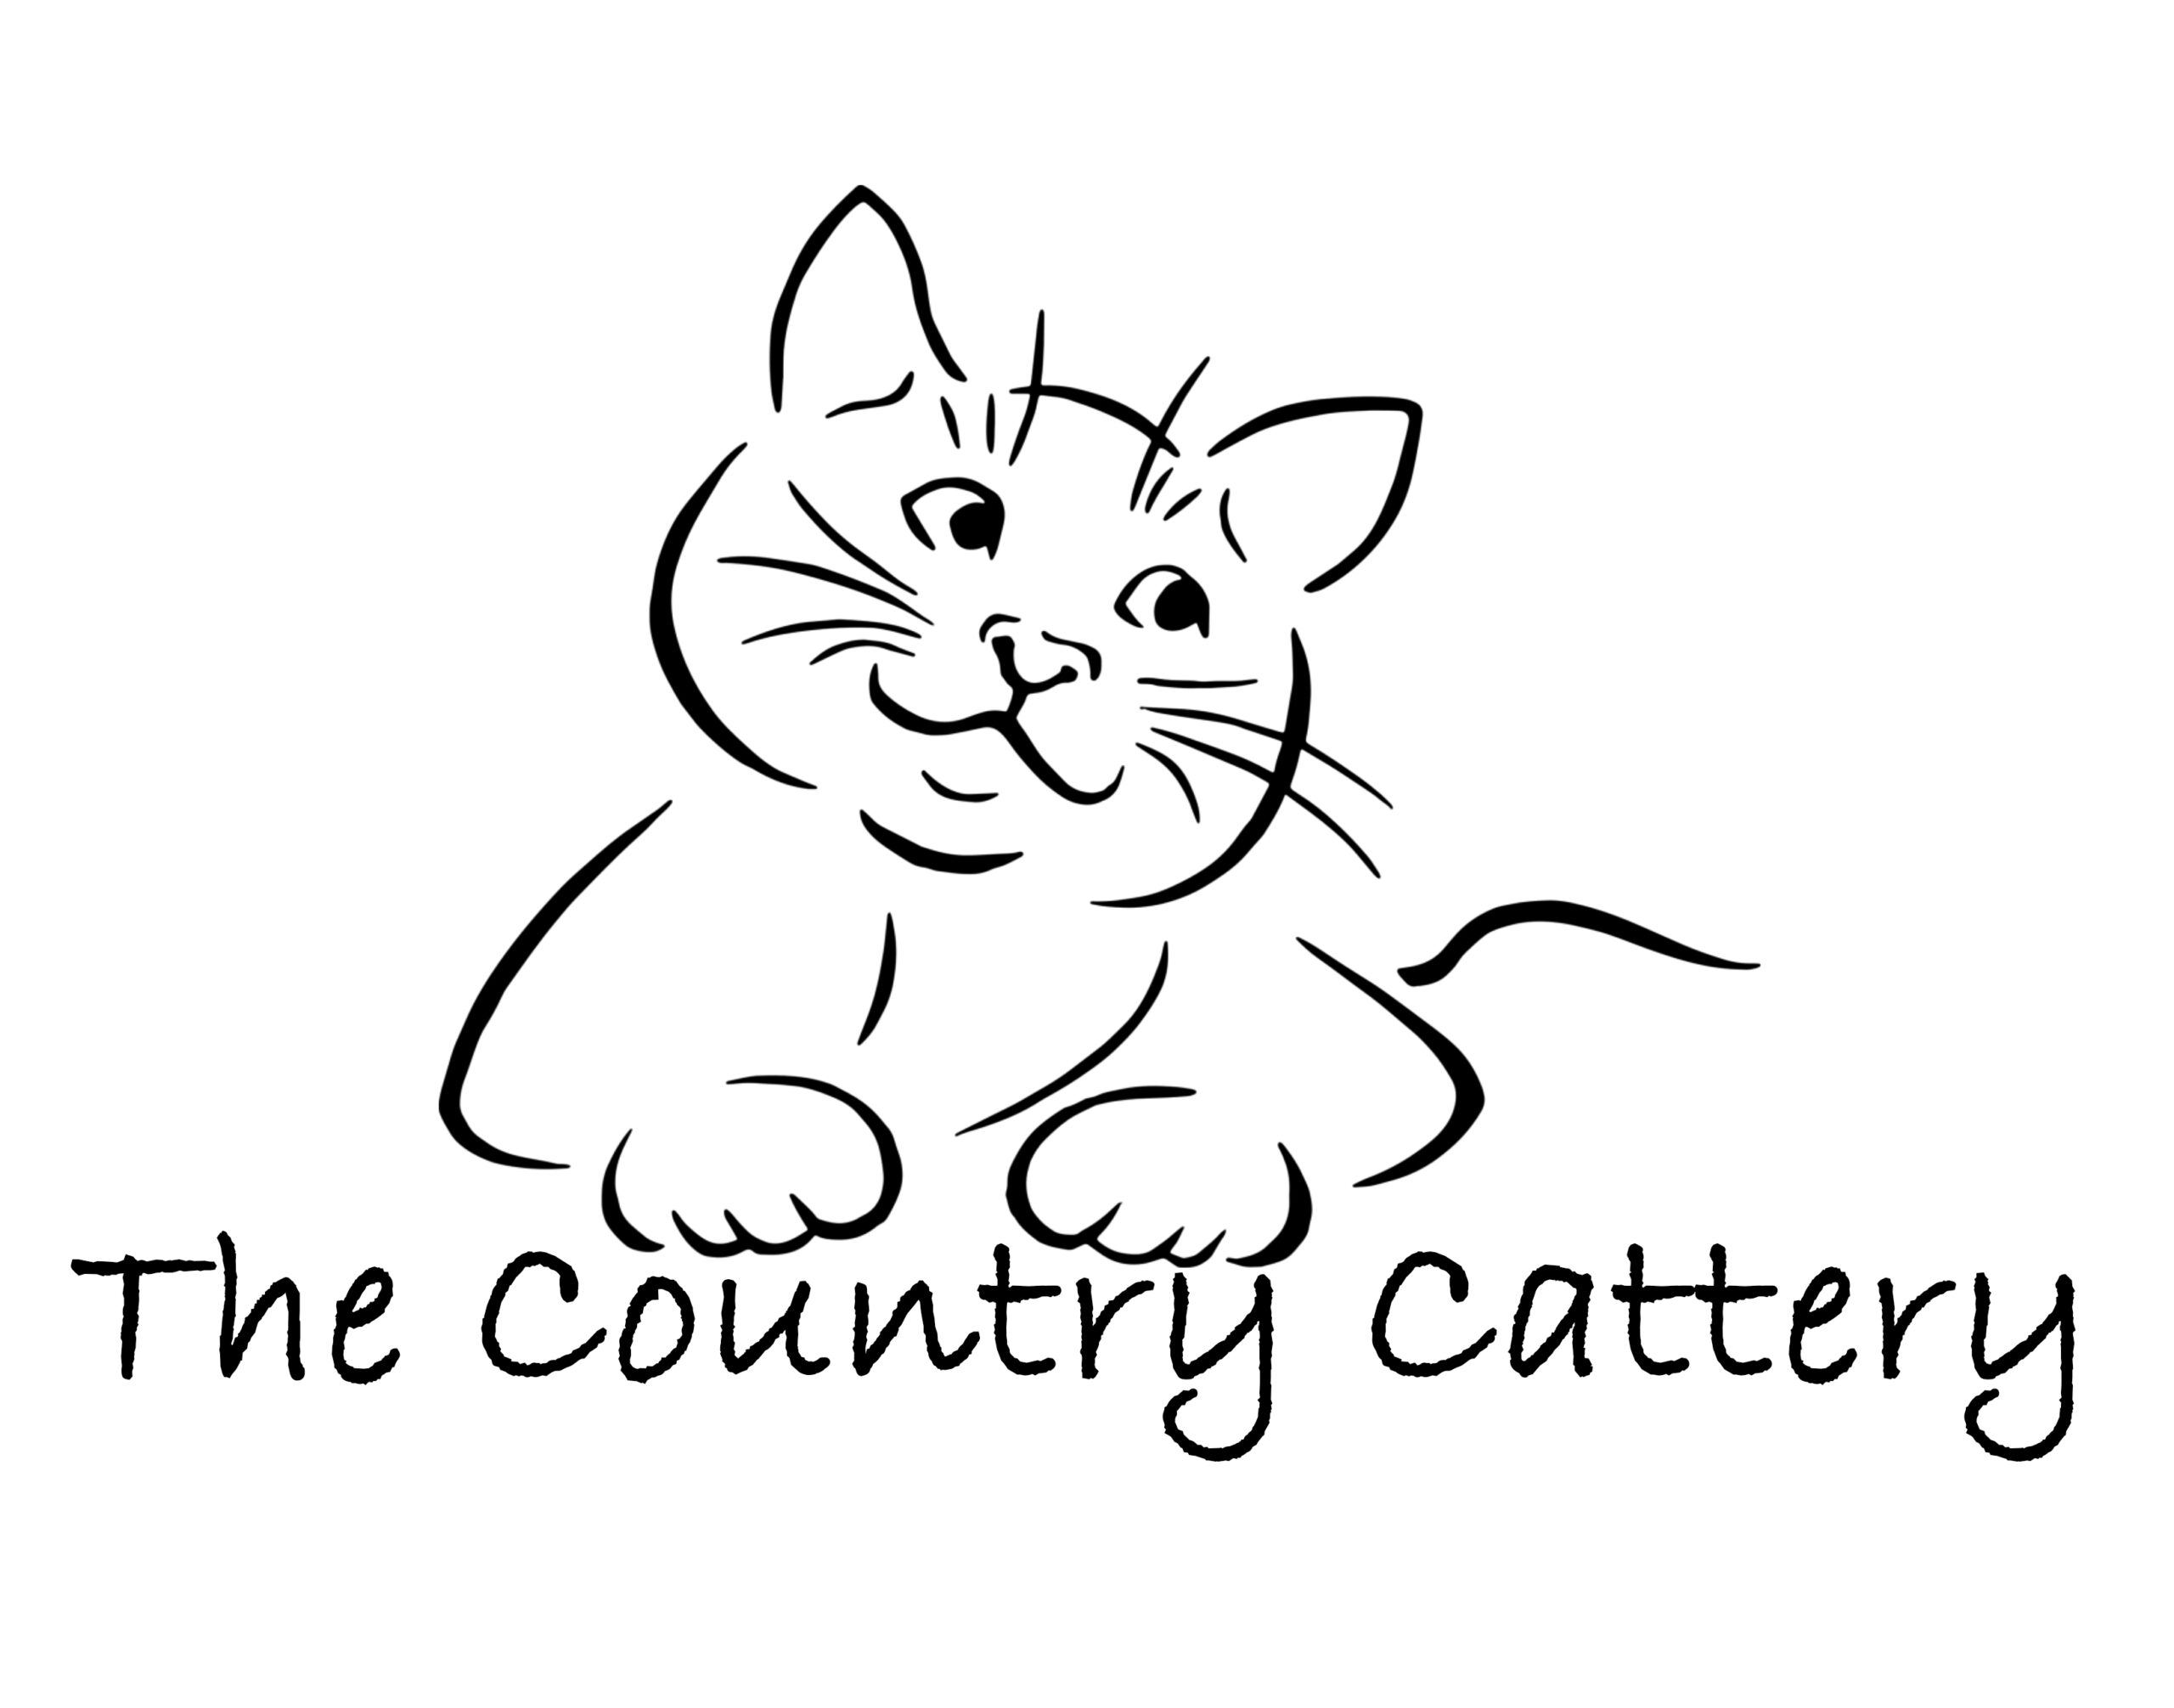 The Country Cattery